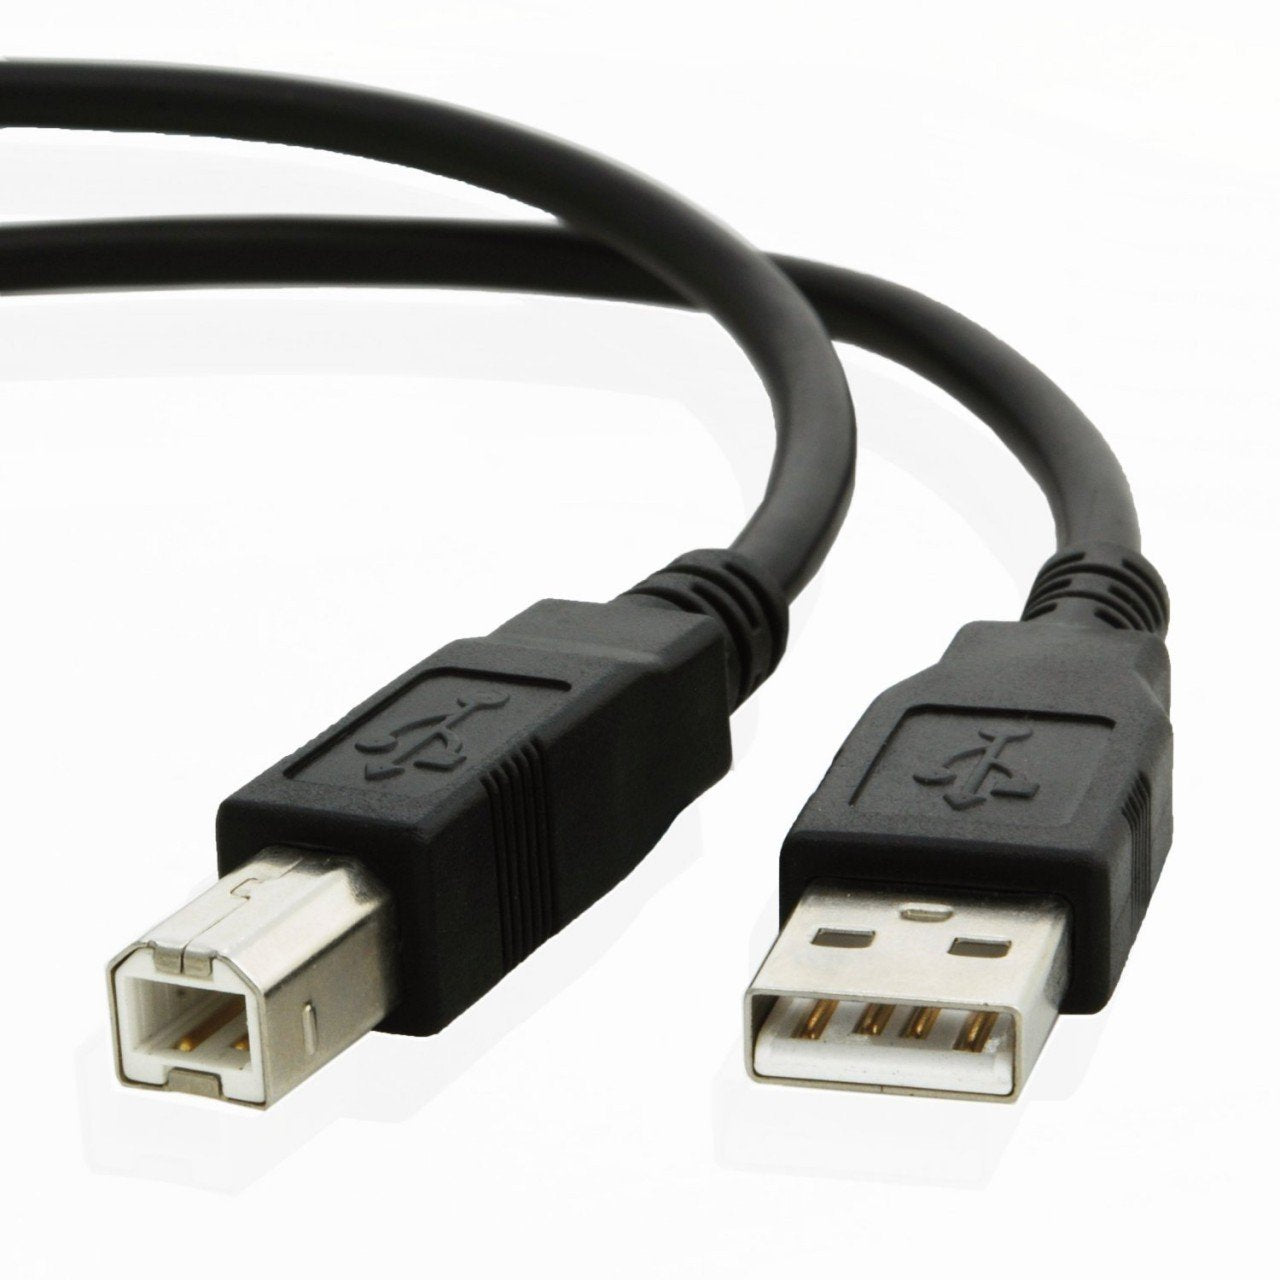 USB cable for Epson EXPRESSION ET-3600